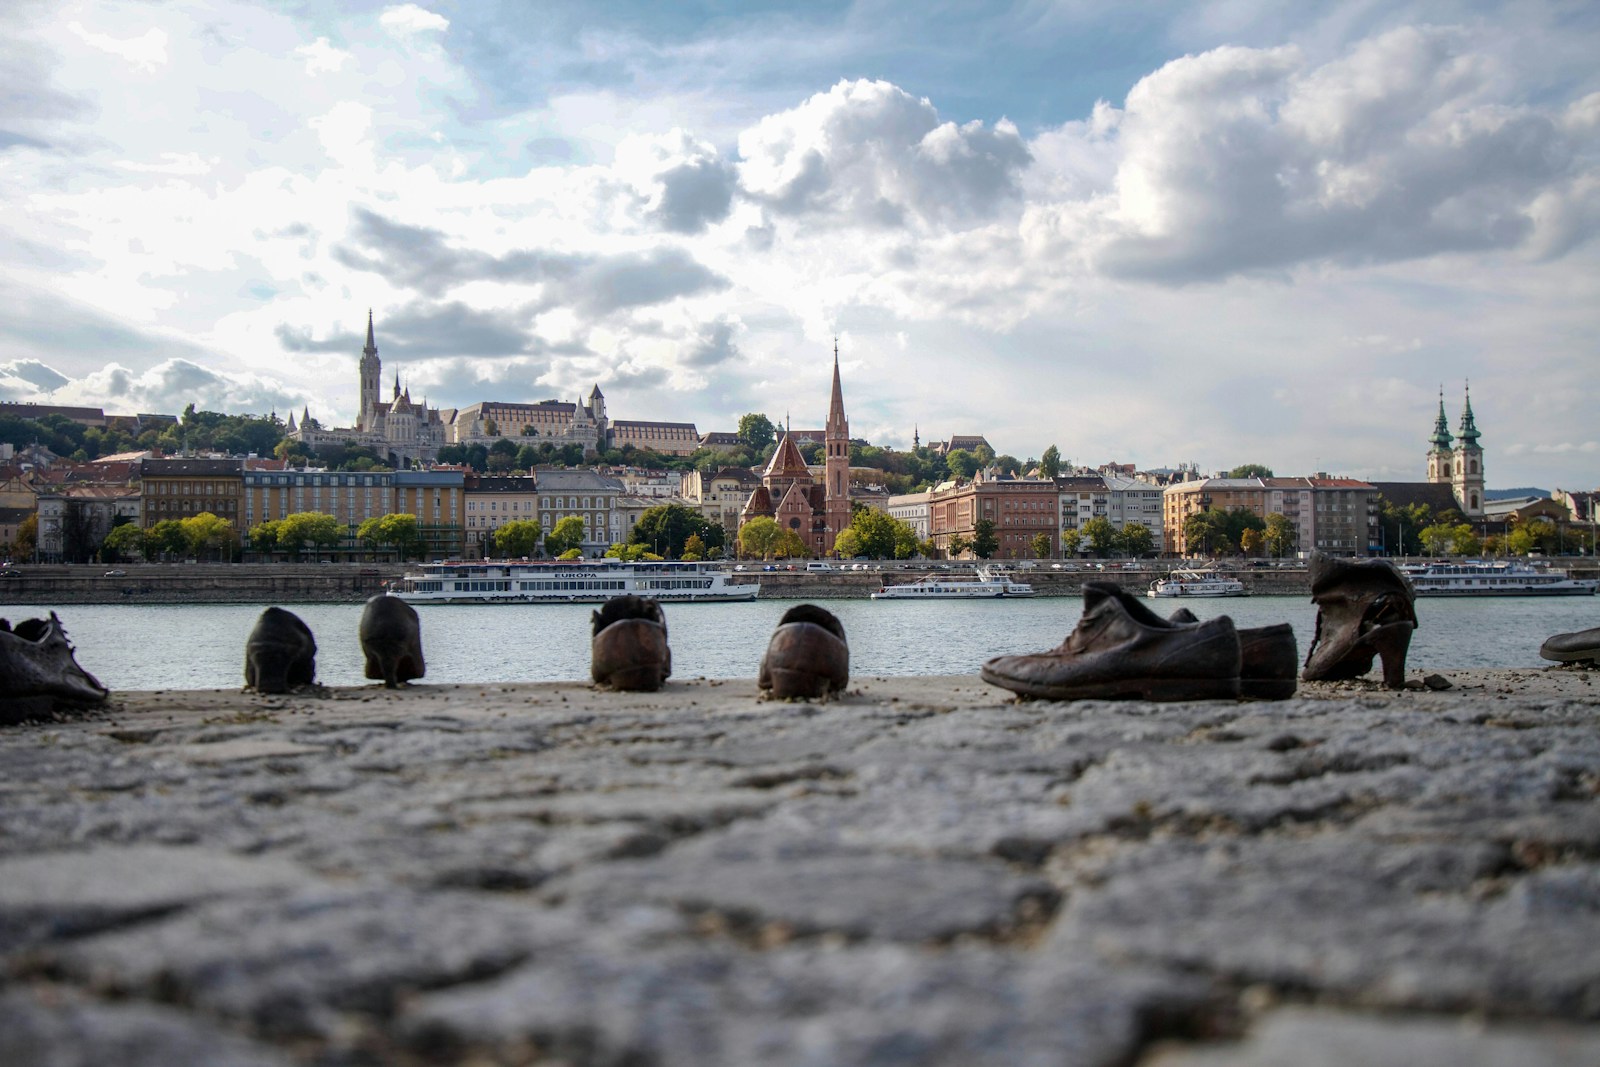 Jewish Budapest a group of shoes that are sitting on the ground